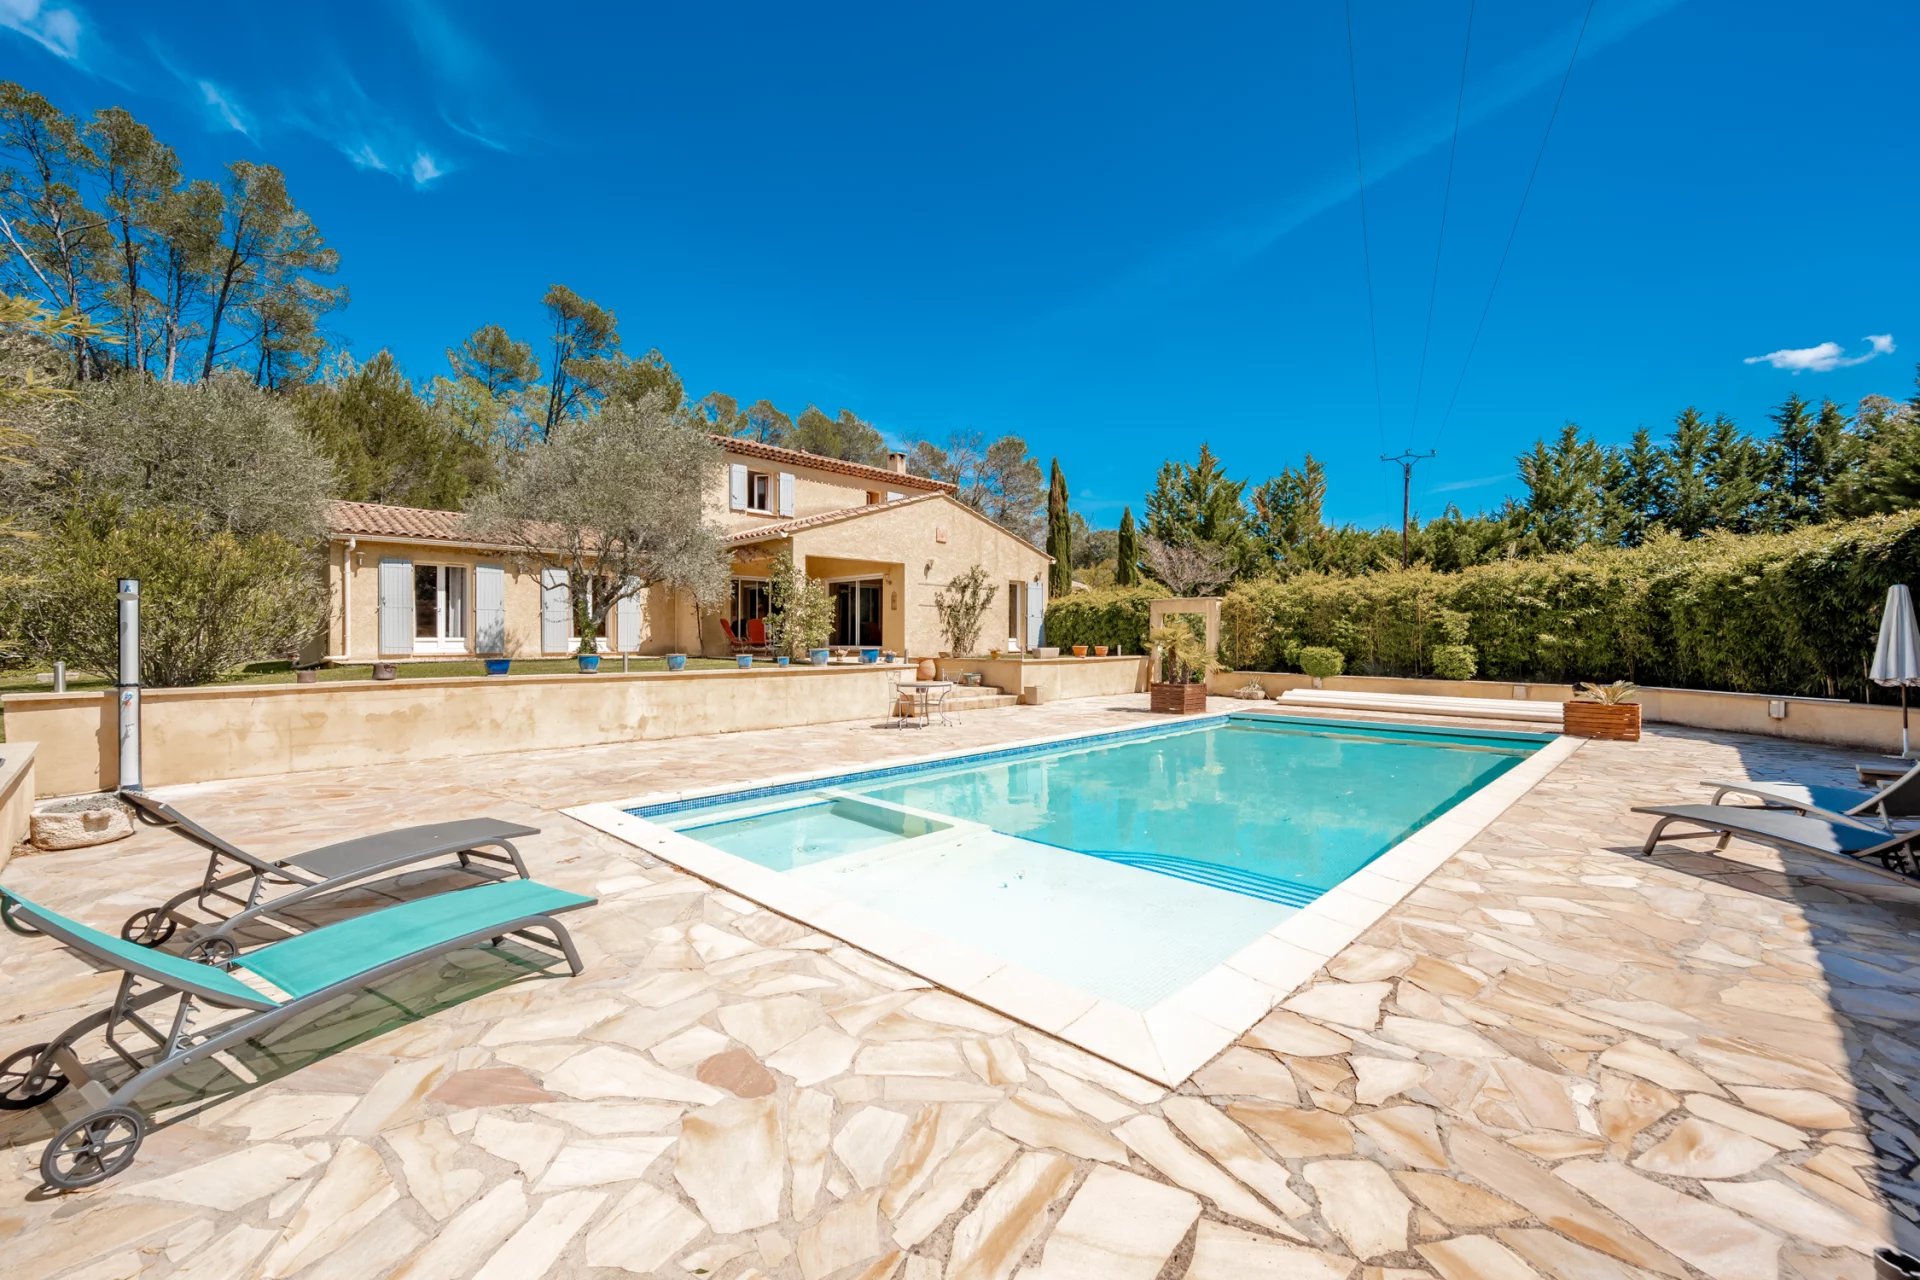 VILLA WITH POOL AND PLOT OF 1 HECTARE AT BRIGNOLES CENTRE VAR